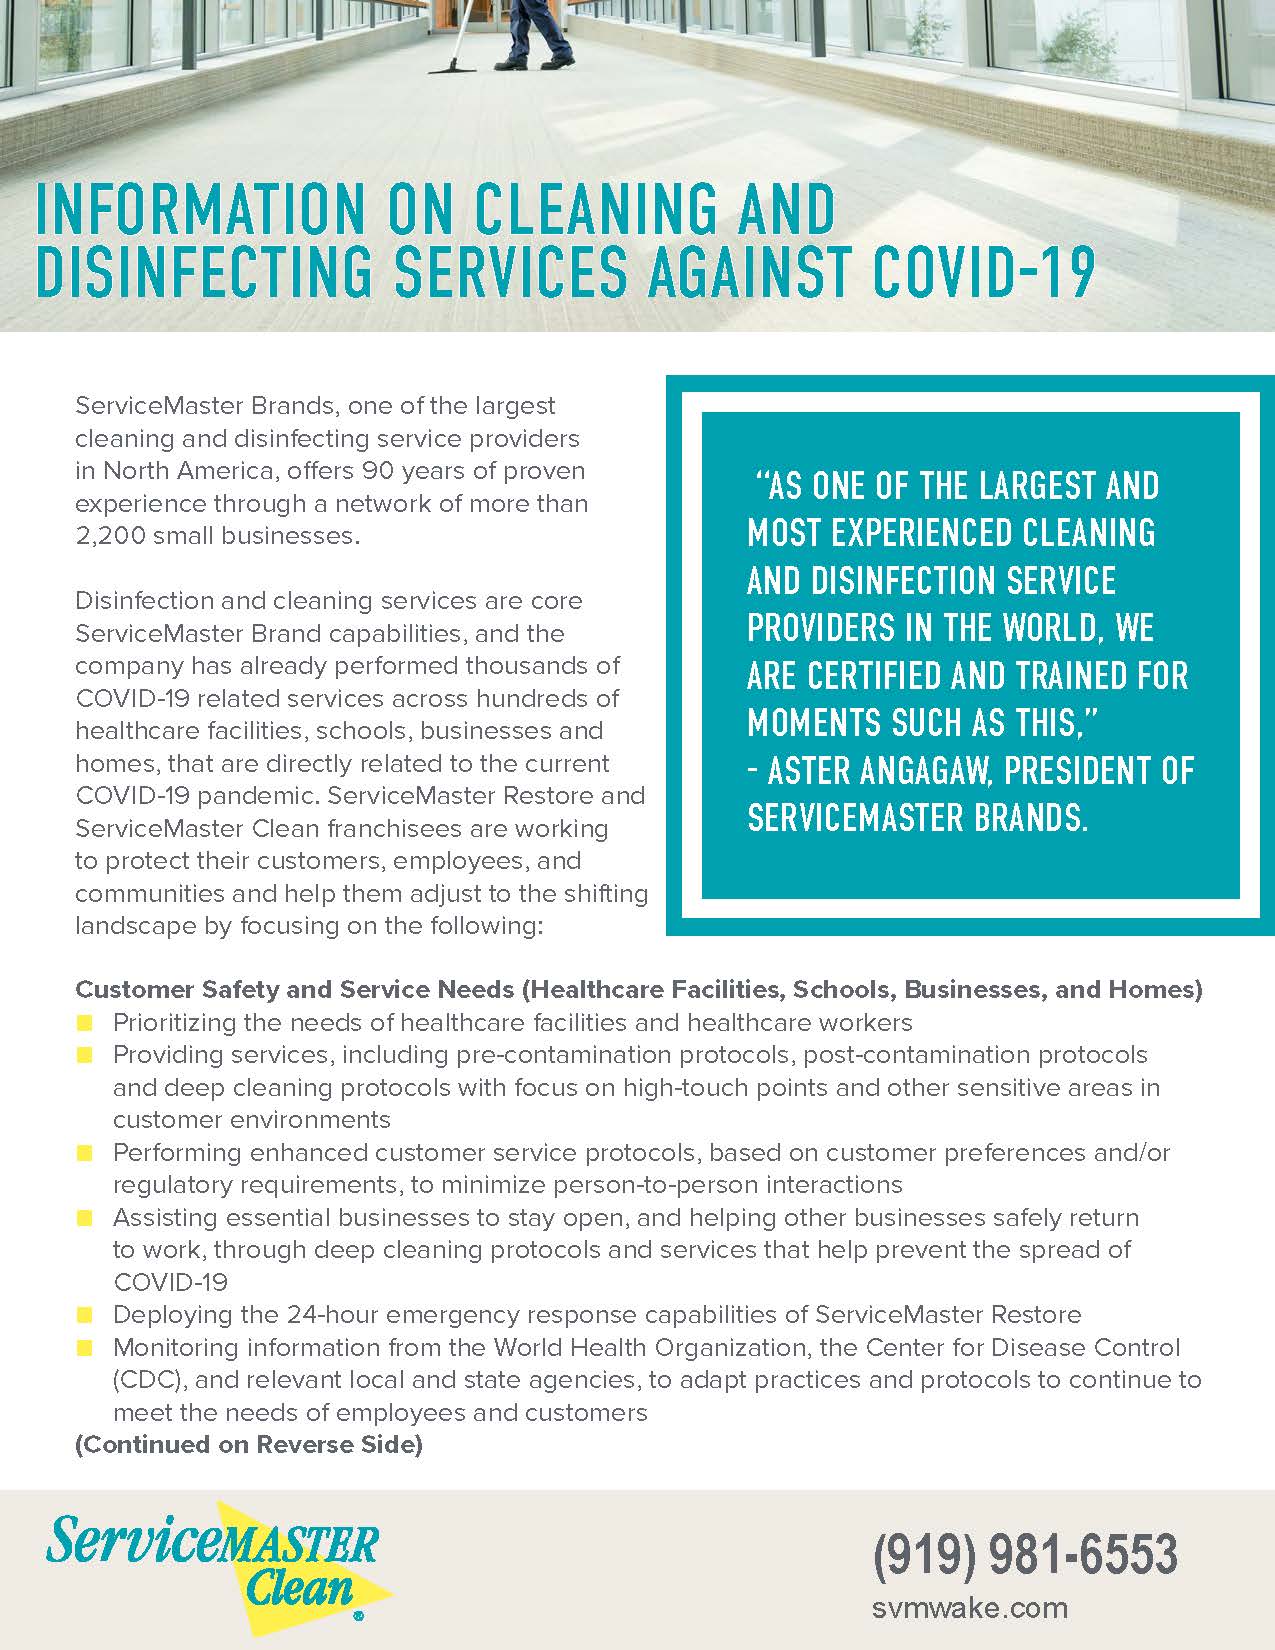 Information on Cleaning and Disinfecting Services Against COVID-19